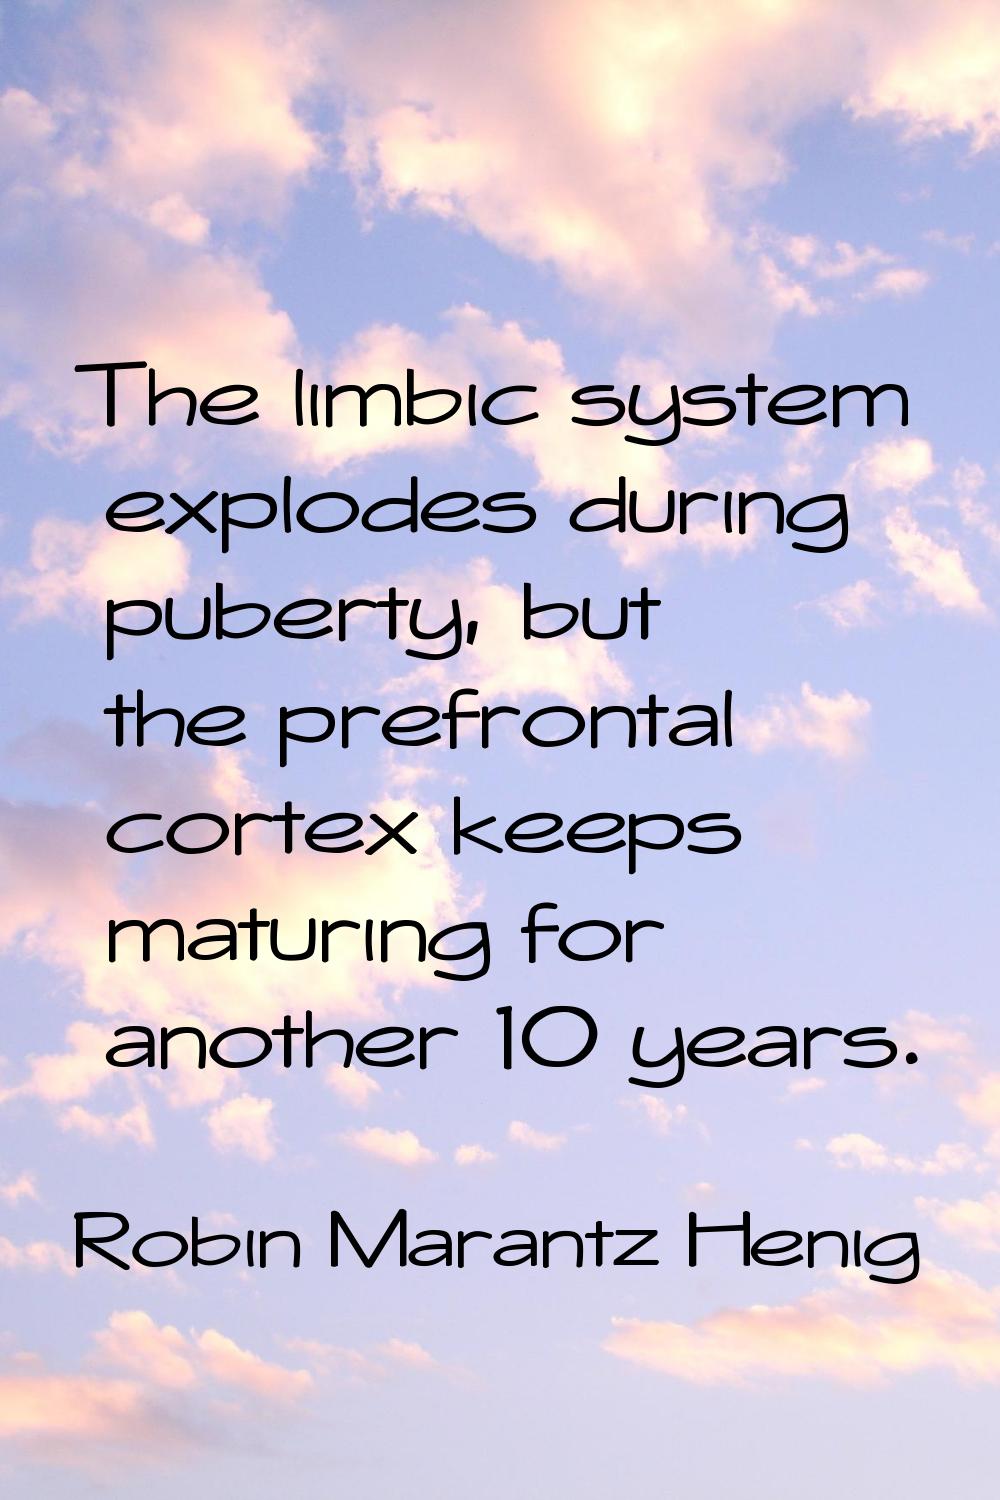 The limbic system explodes during puberty, but the prefrontal cortex keeps maturing for another 10 